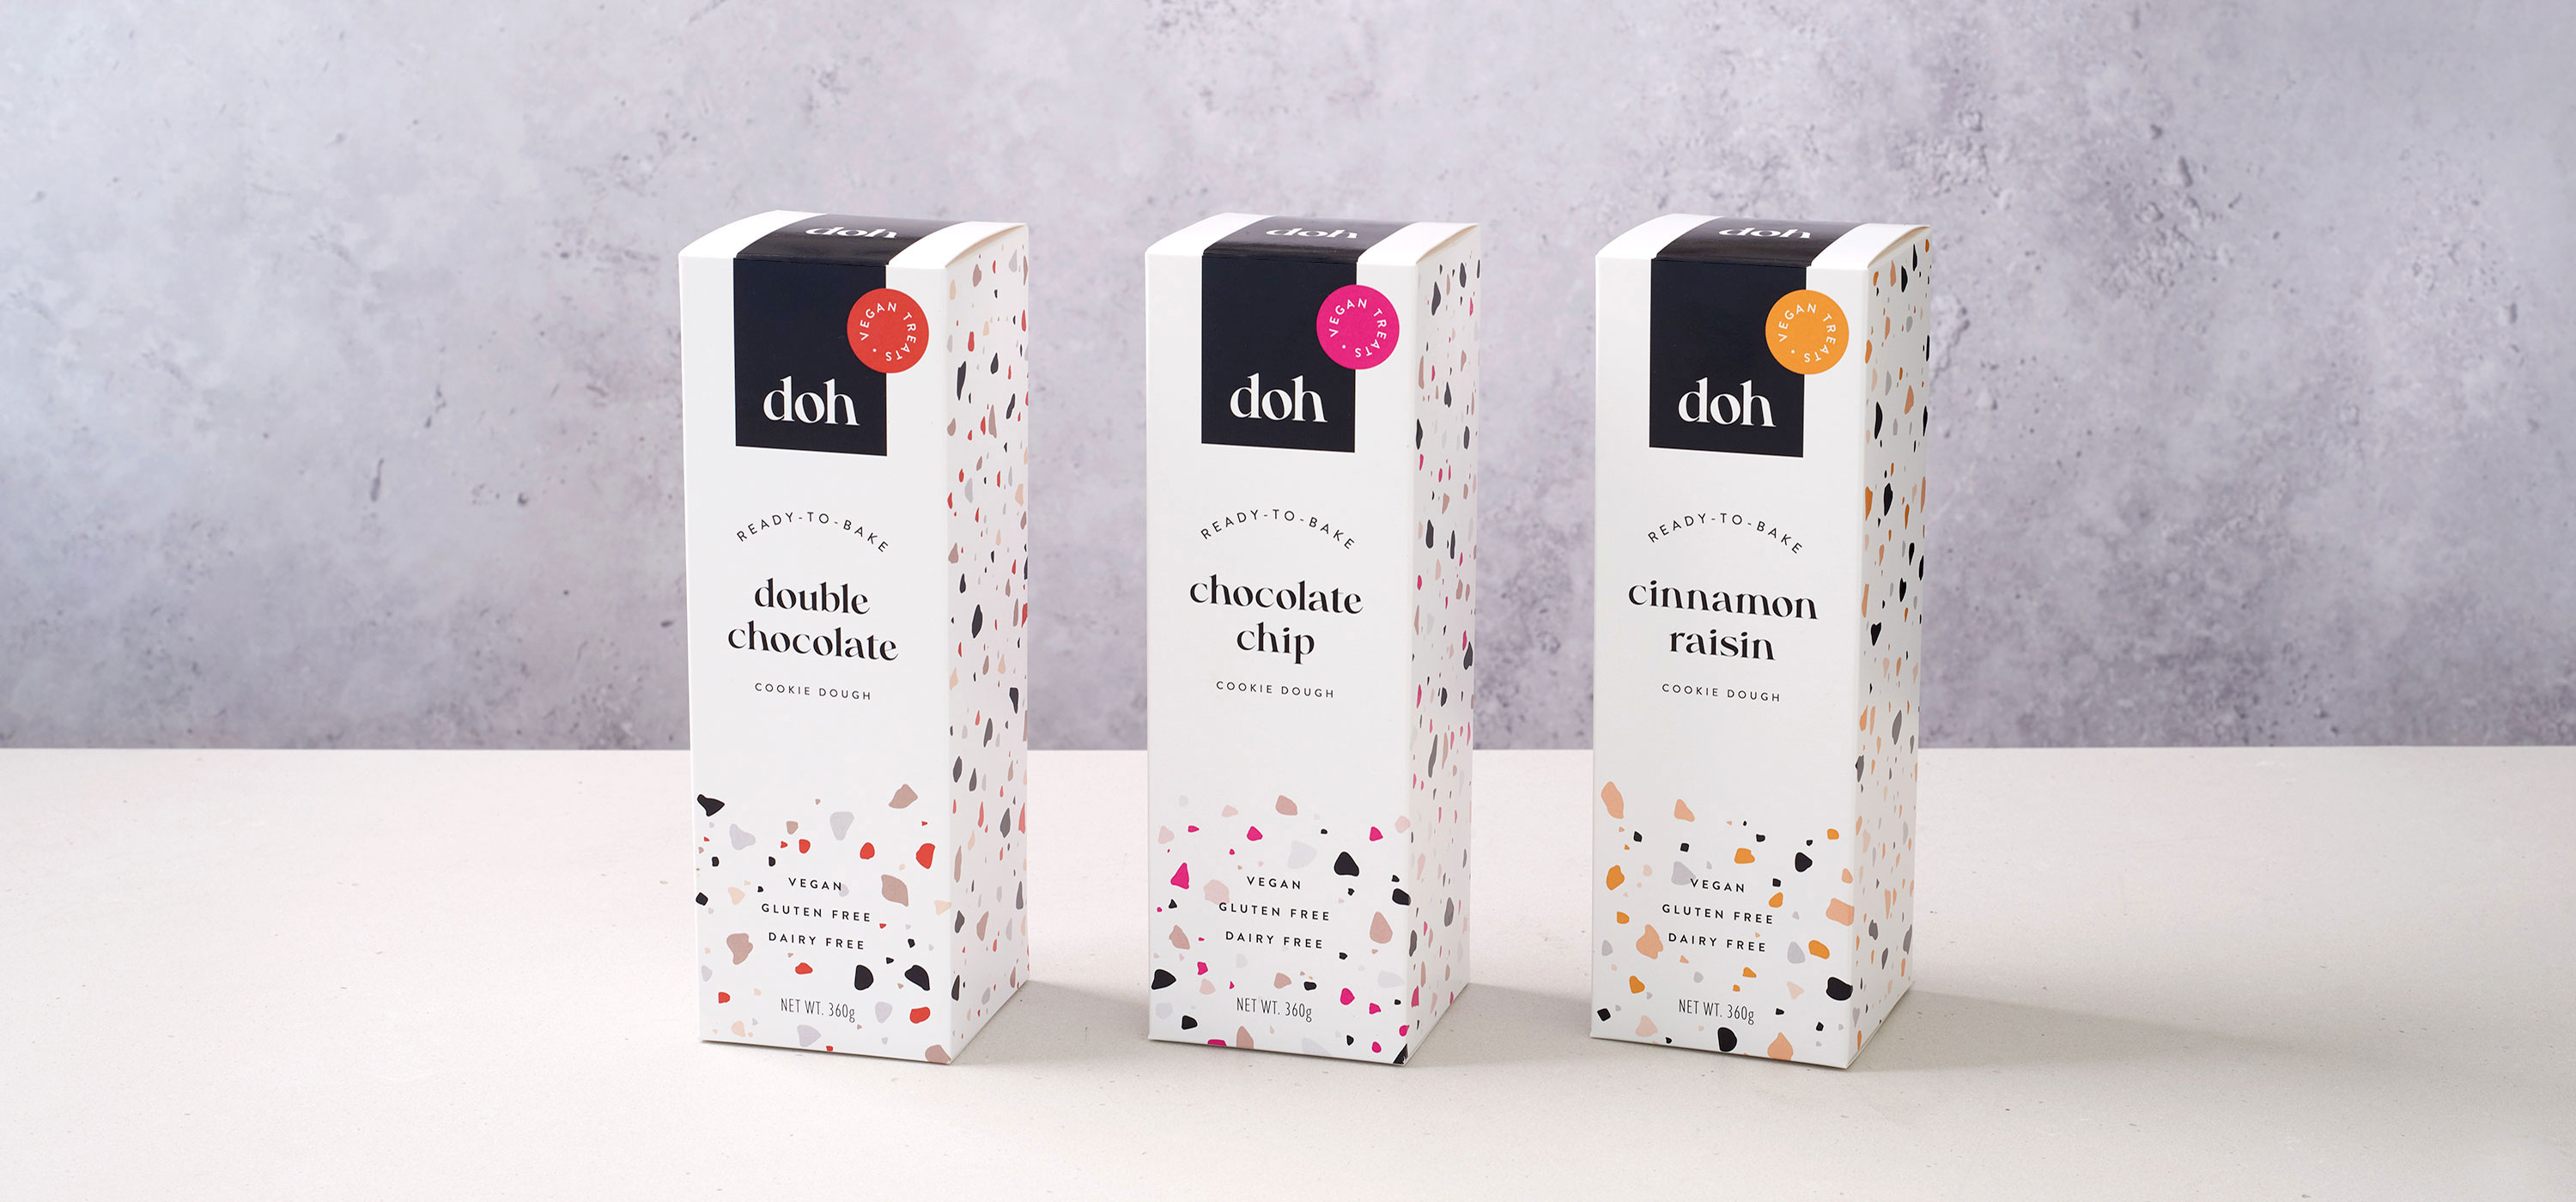 Fun Brand Identity for Doh, Vegan and Gluten-free Cookie Dough